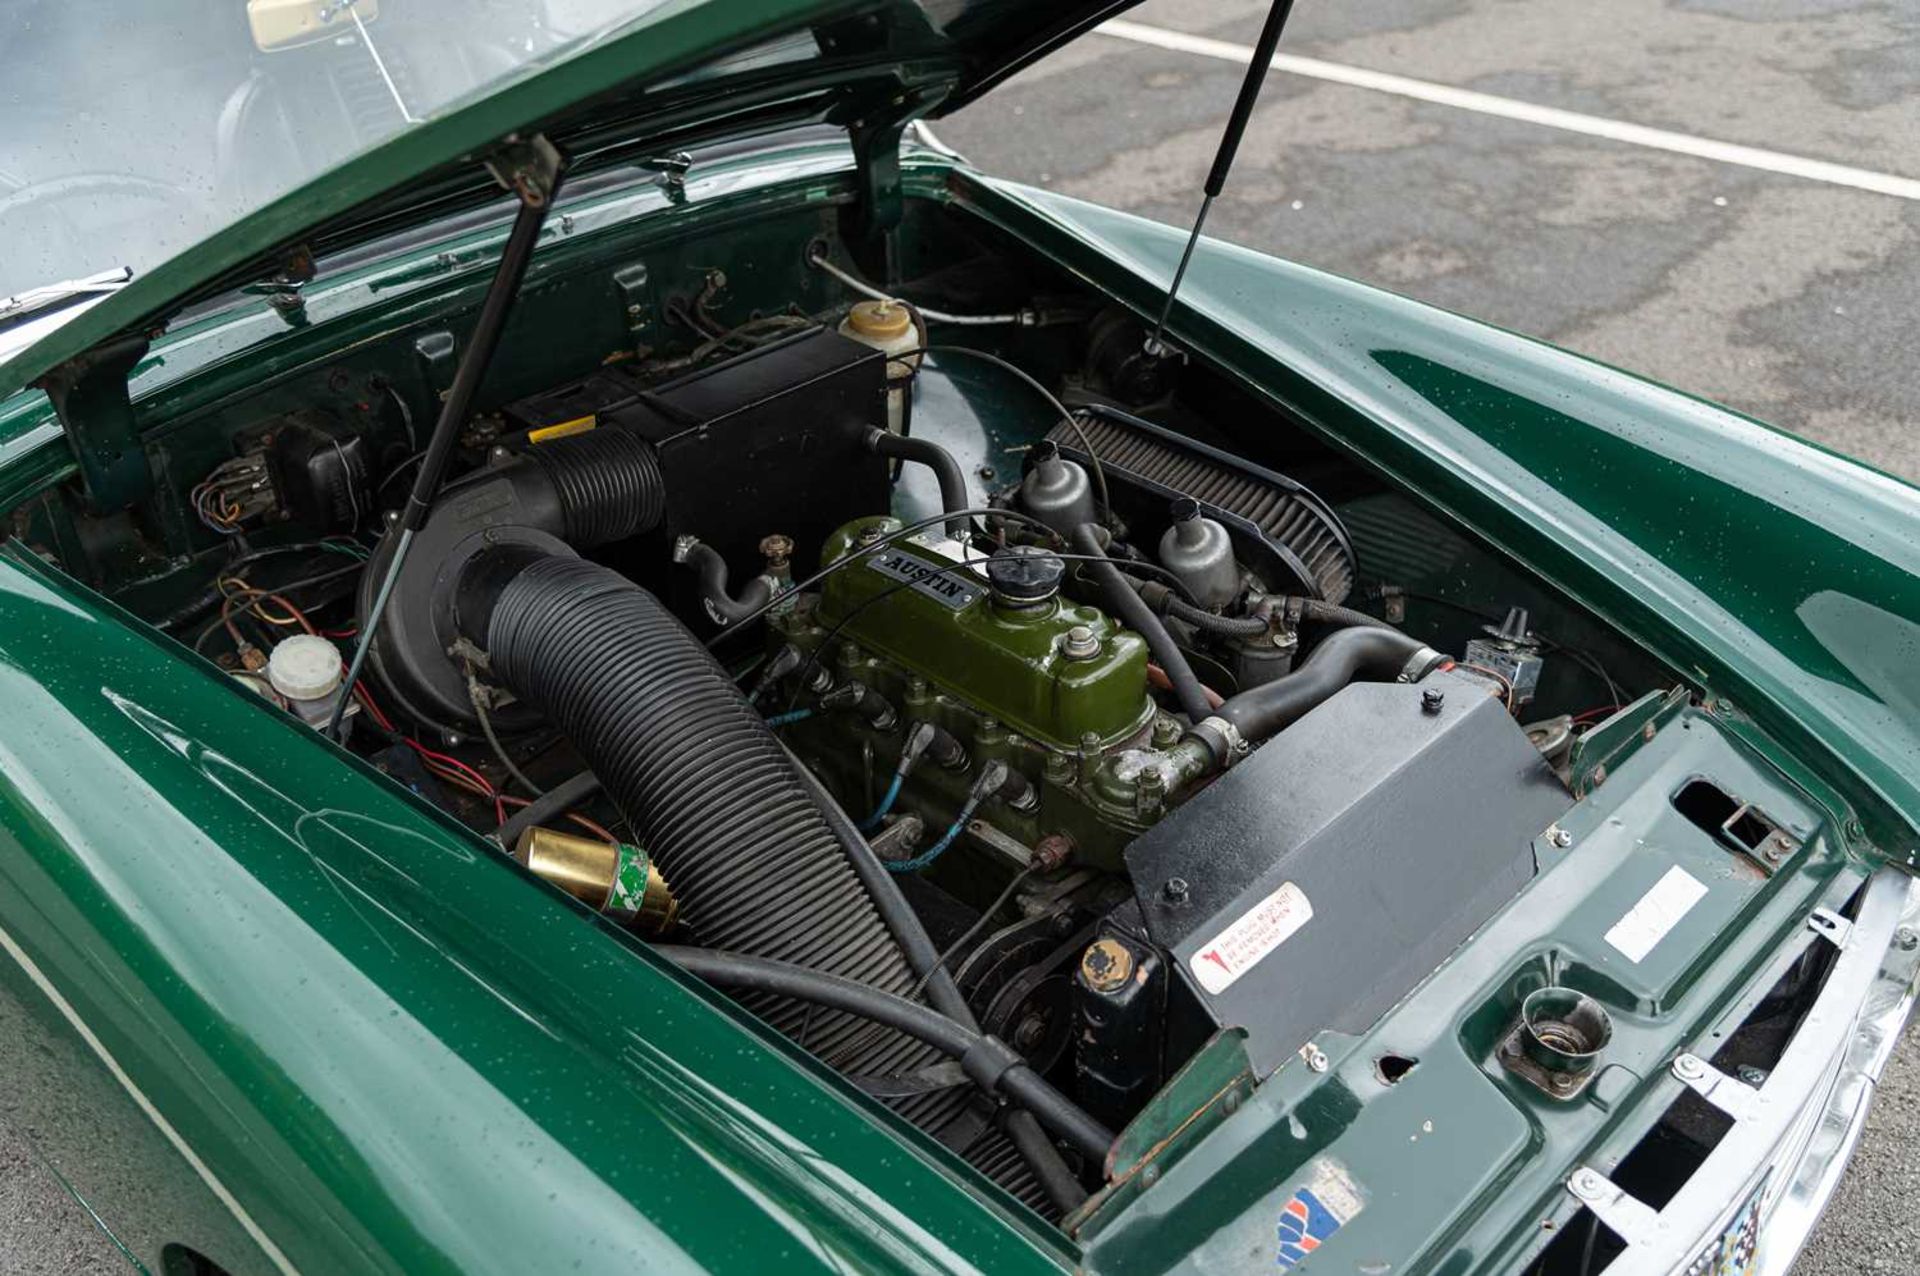 1965 Austin-Healey Sprite Formerly the property of British Formula One racing driver David Piper - Image 67 of 71